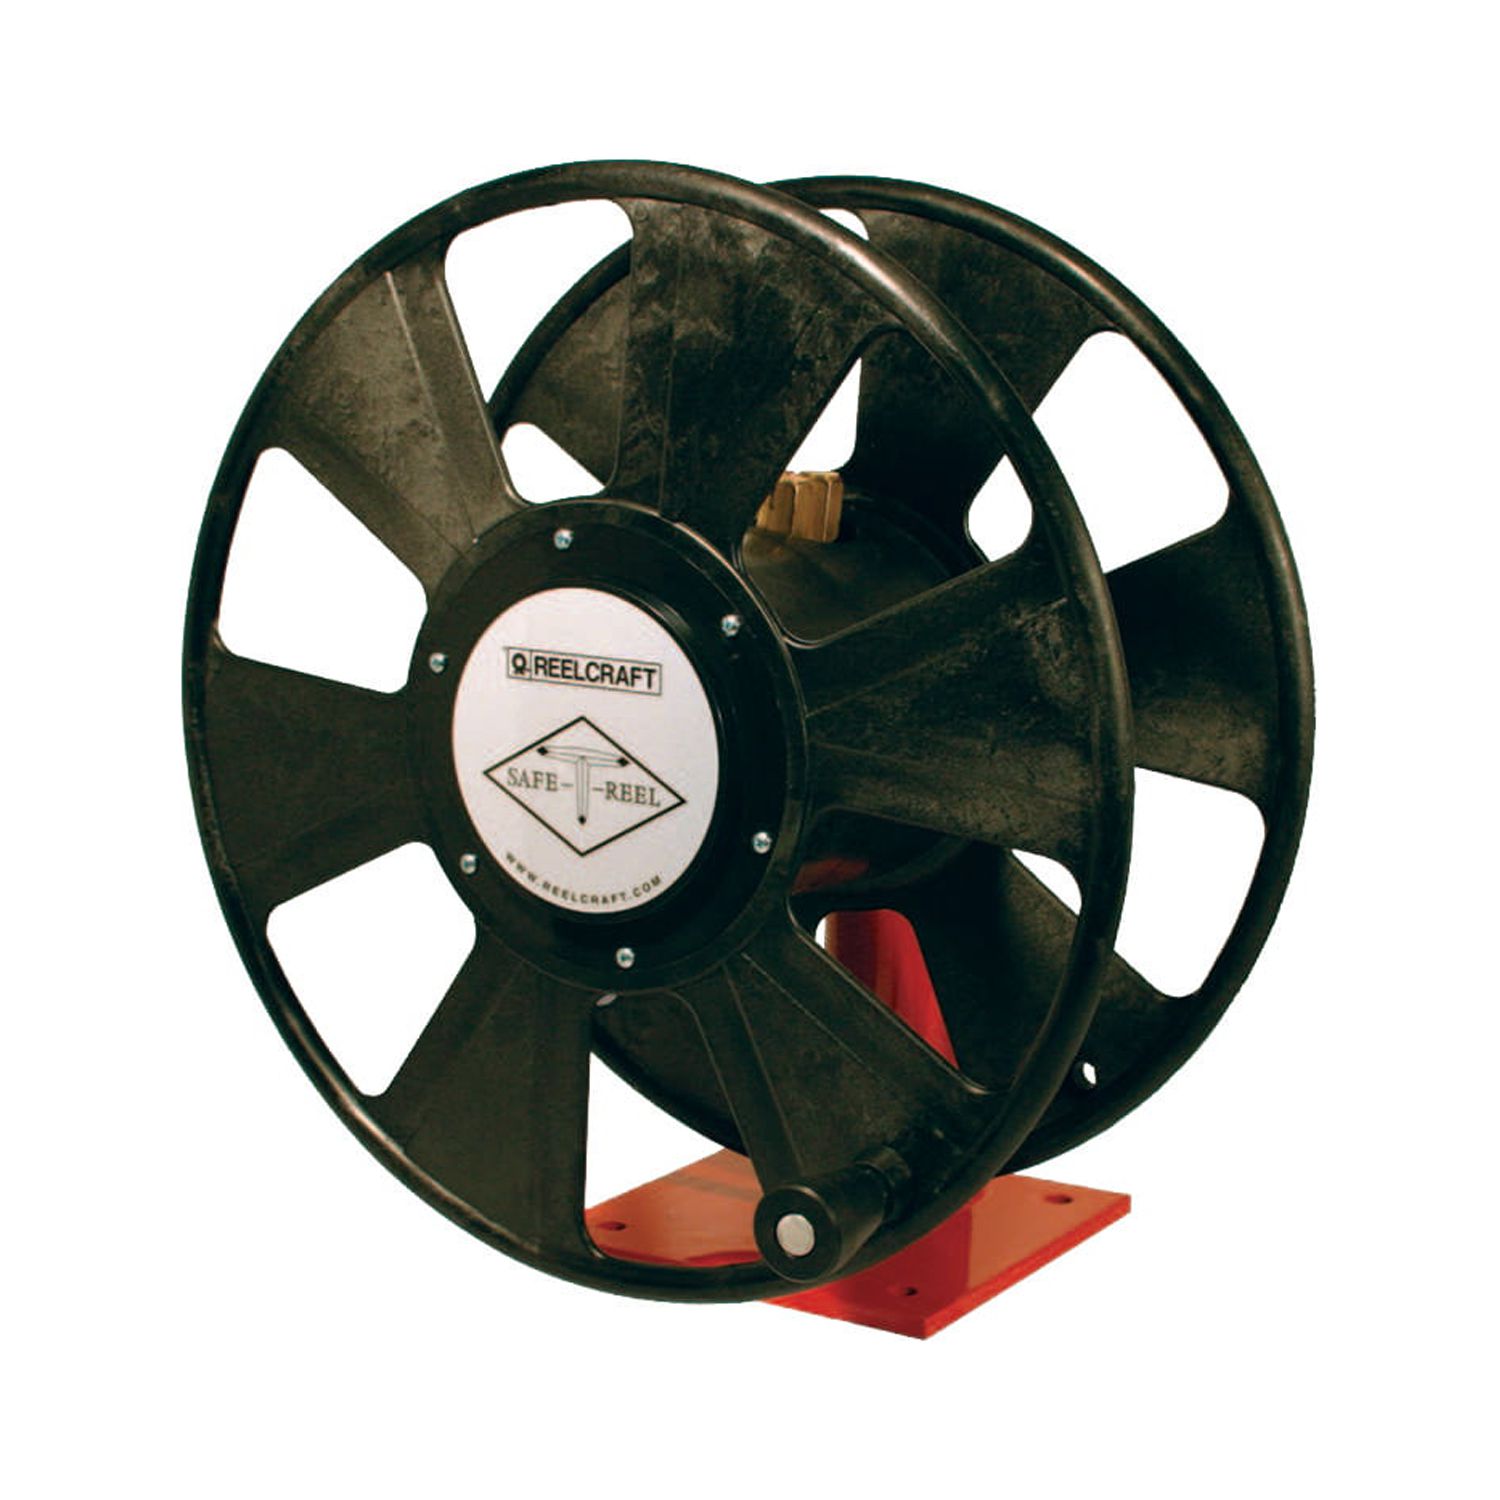 Reelcraft Gas-Welding T-Grade Hose Reels with Hose, 50 ft, Retractable - image 1 of 2